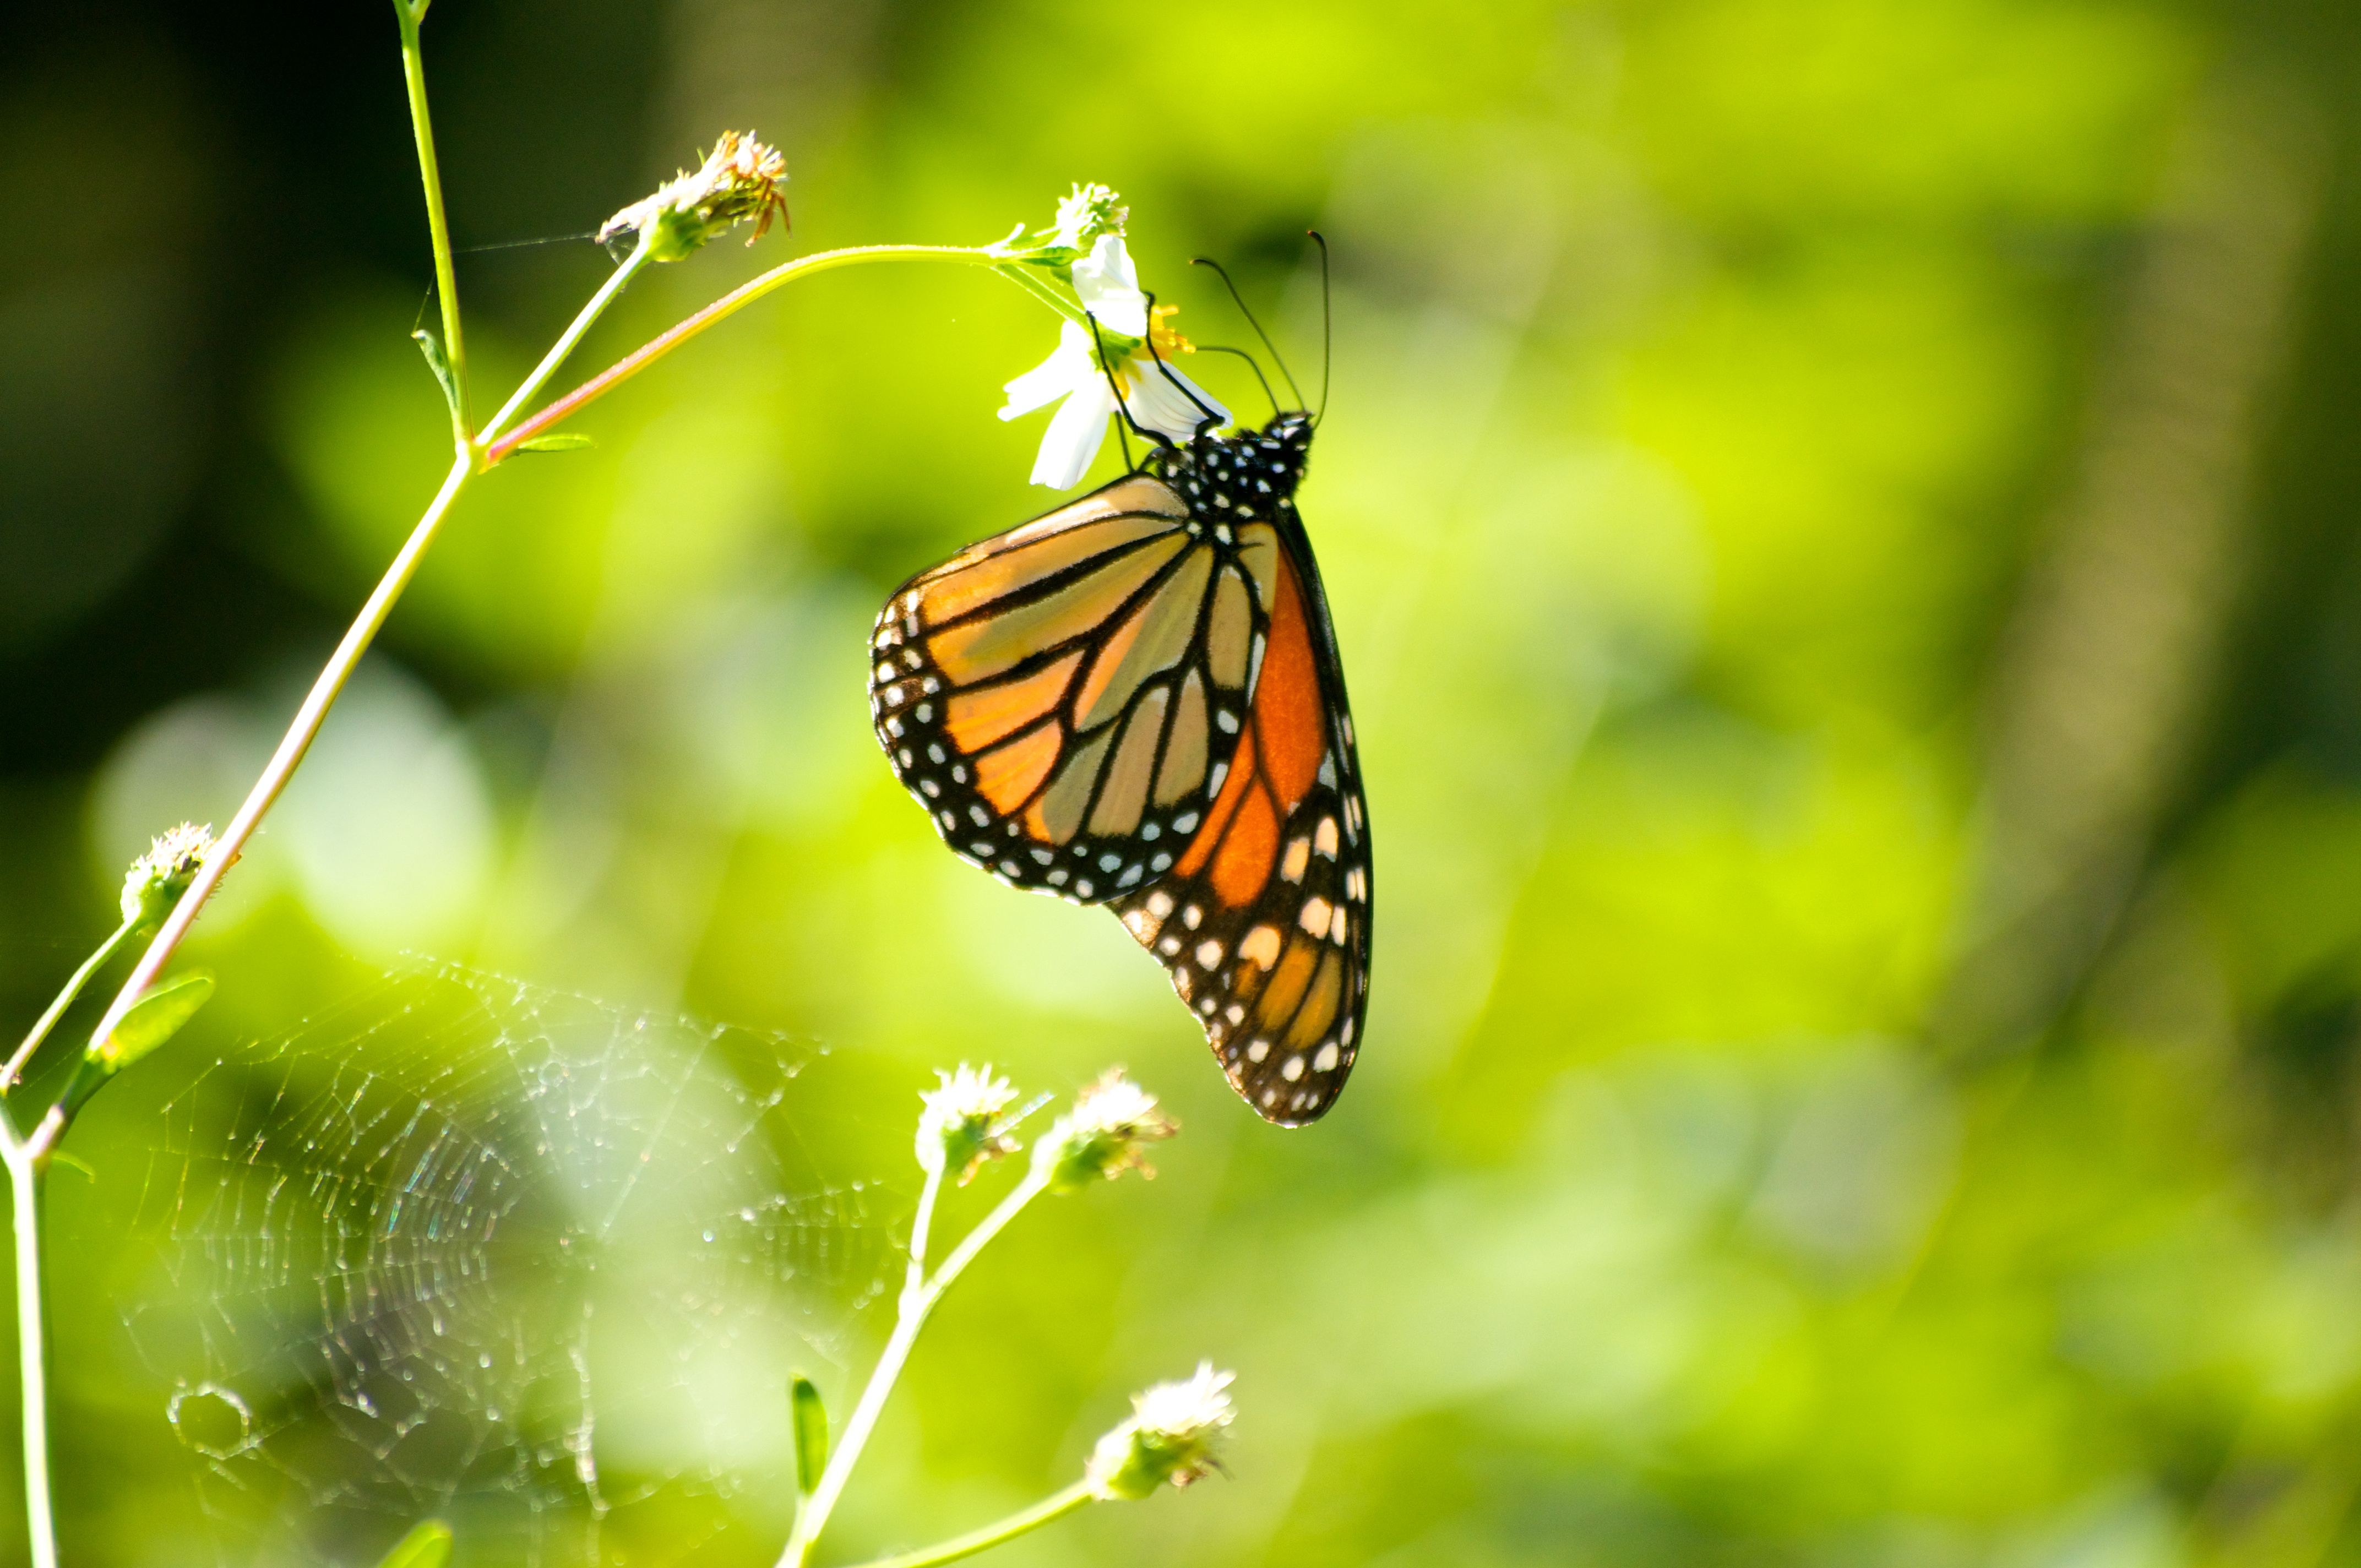 BASF and farmers partner to help the monarch butterfly